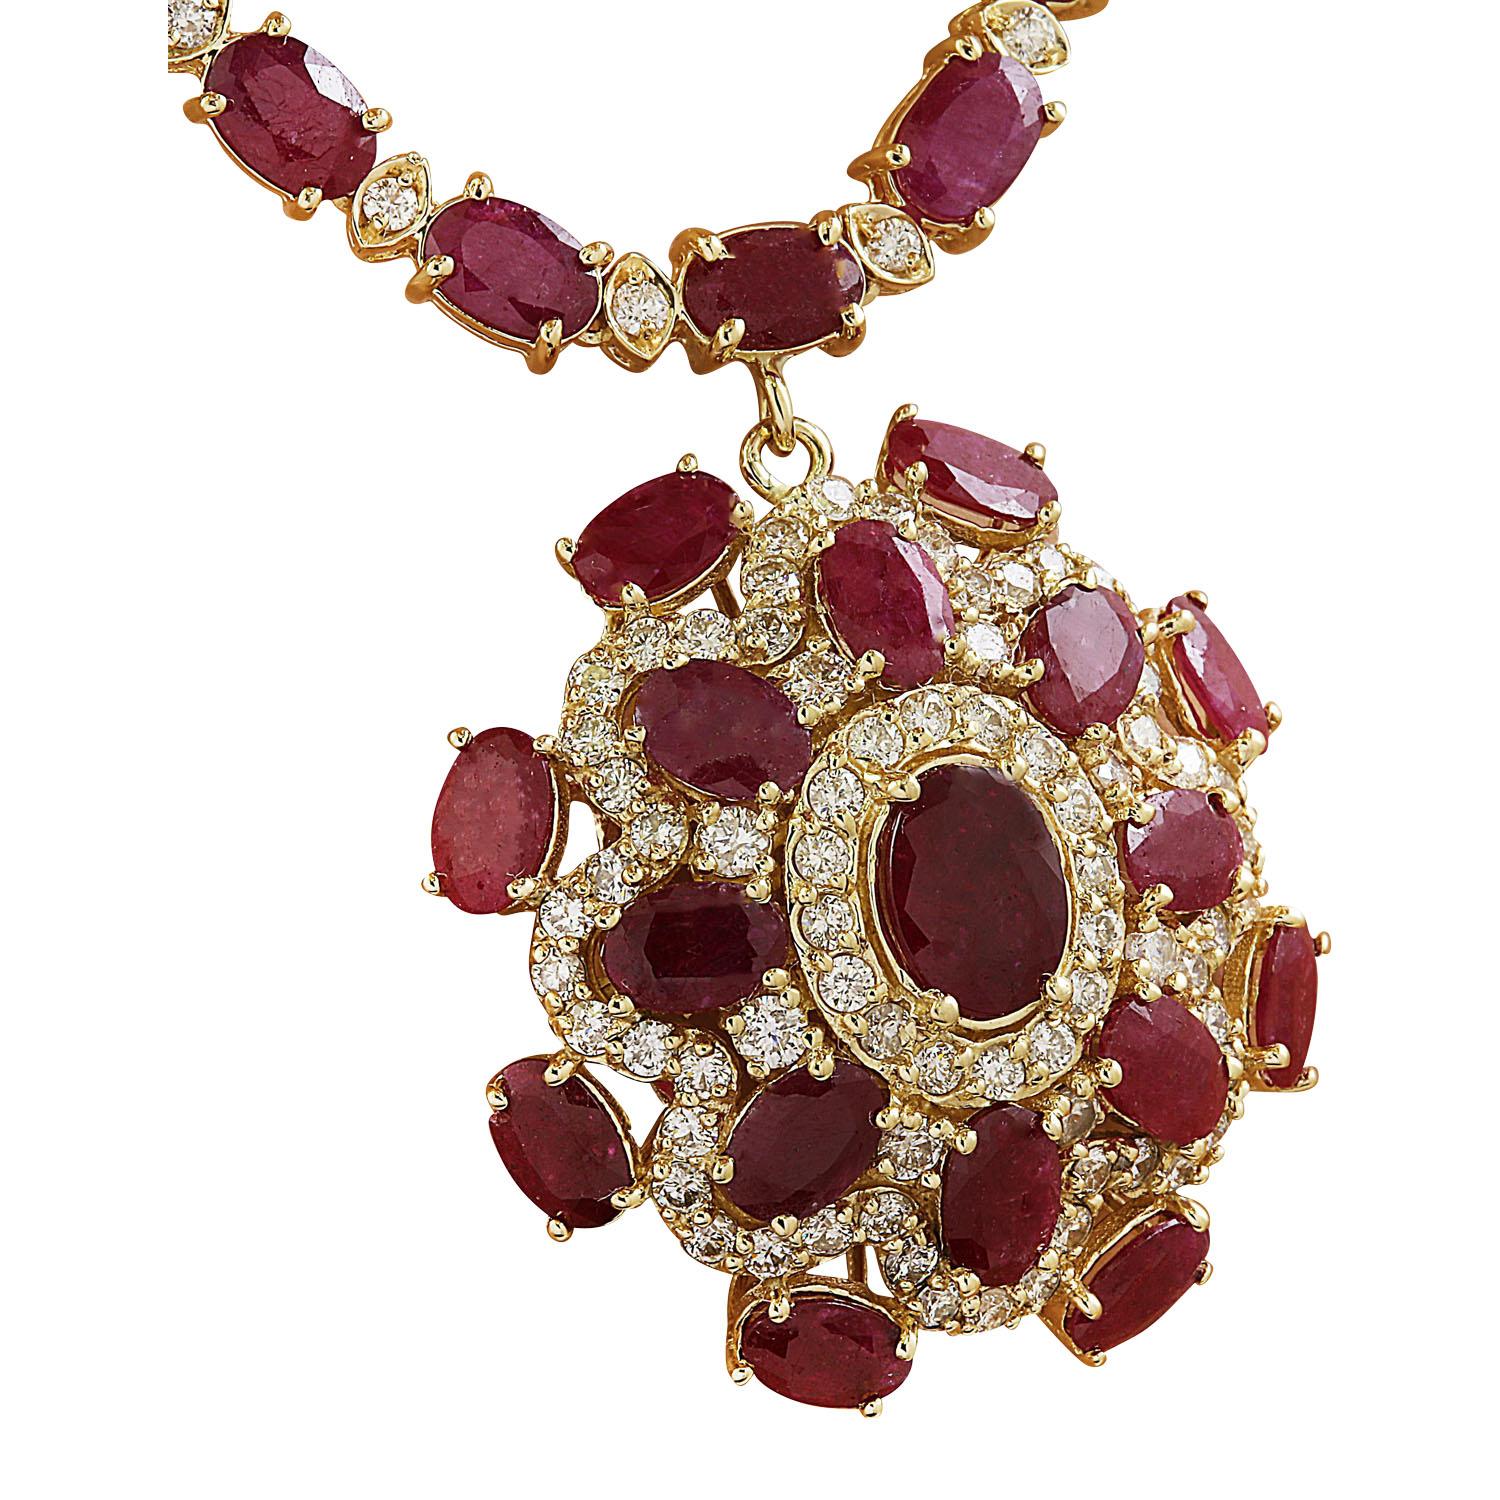 43.35 Carat Natural Ruby 14 Karat Solid Yellow Gold Diamond Necklace
Stamped: 14K
Total Necklace Weight: 32.8 Grams
Necklace Length: 18 Inches
Center Ruby Weight: 0.90 Carat (8.00x6.00 Millimeters)
Side Ruby Weight: 39.05 (6.00x4.00